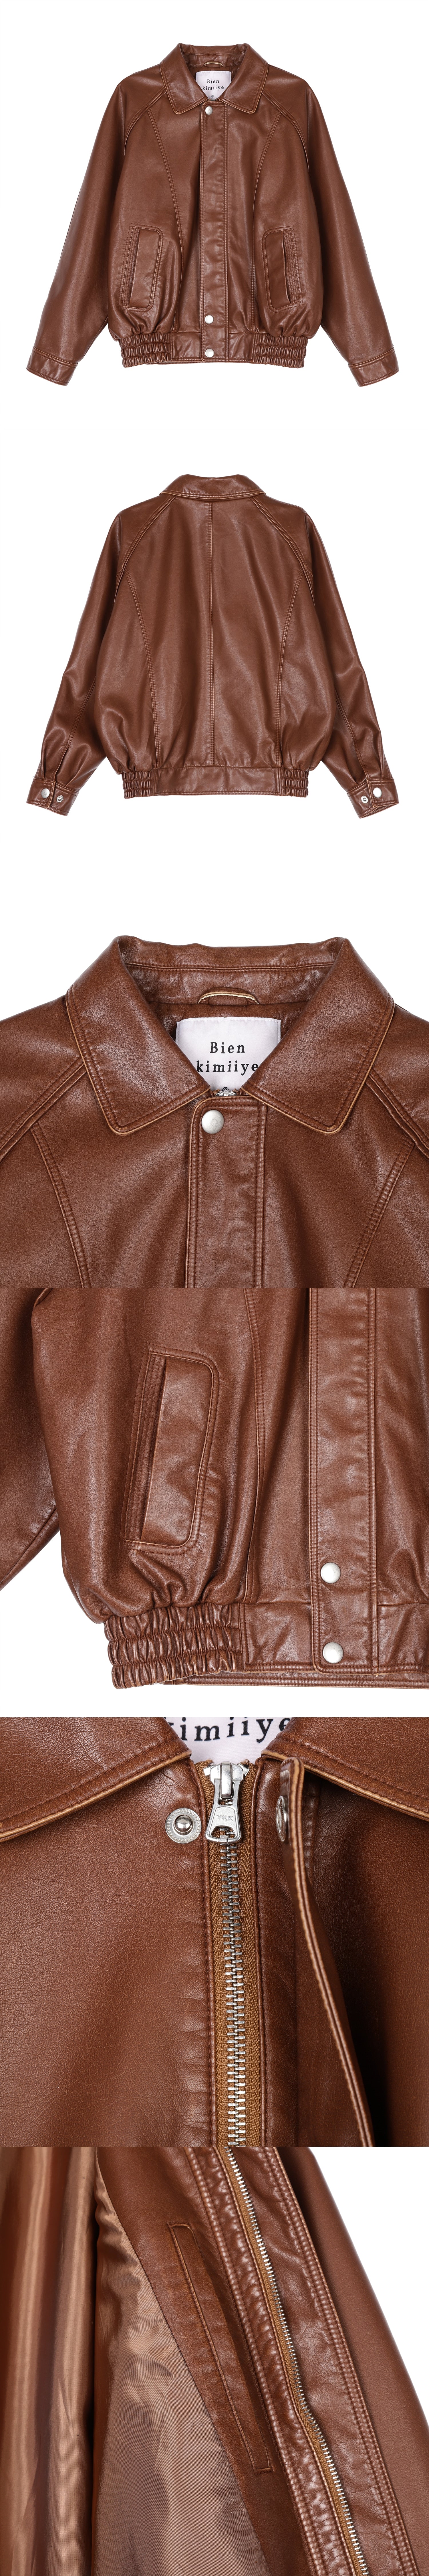 pigment over leather jacket